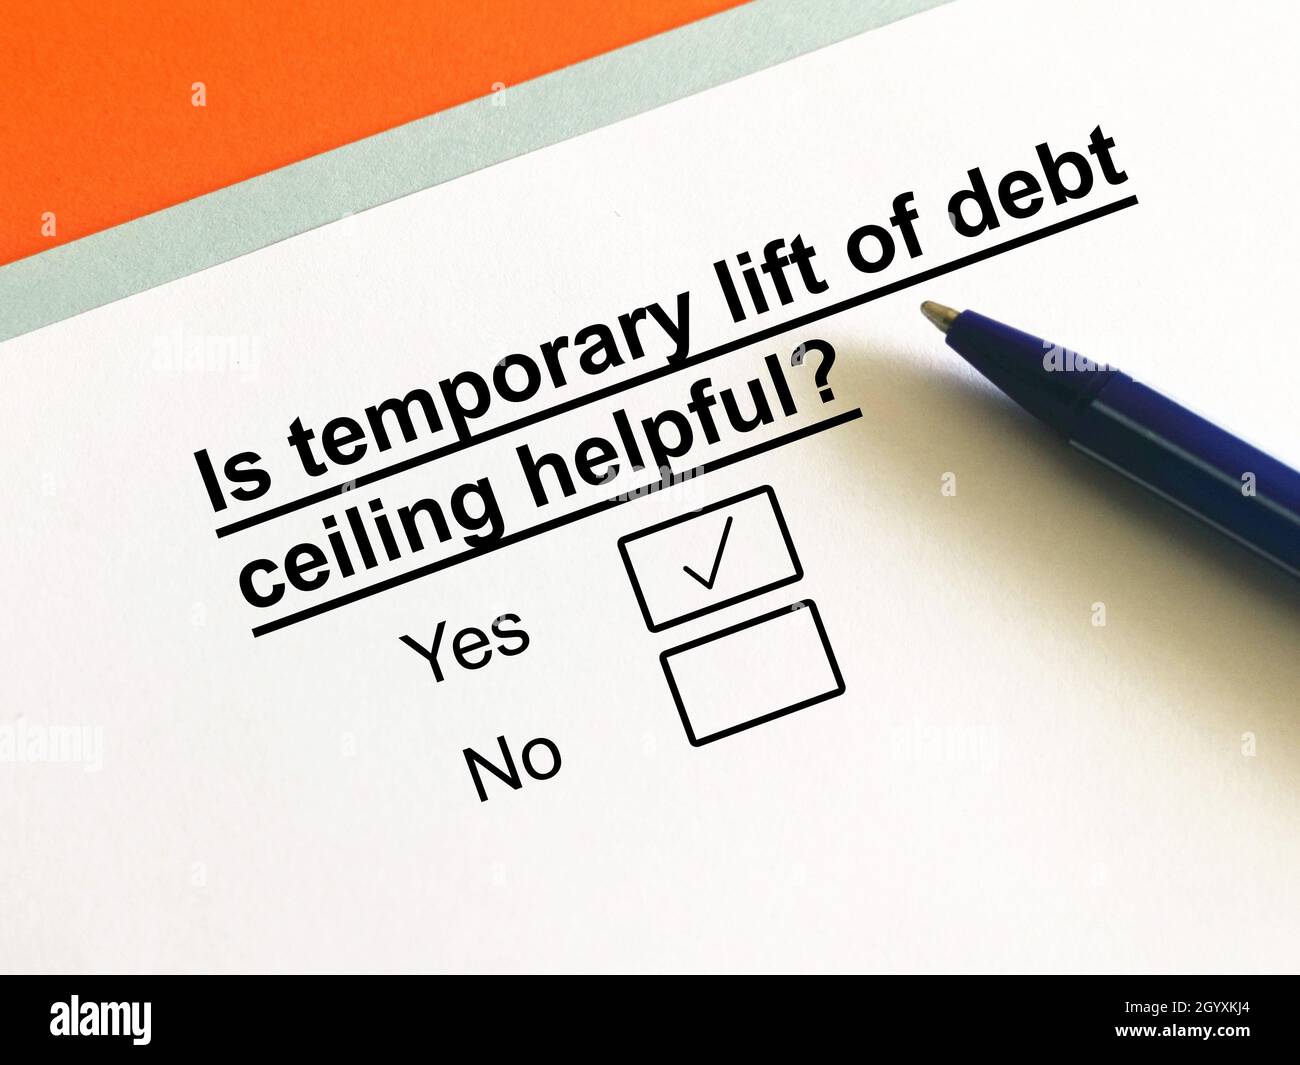 One person is answering question about economy.The person thinks the temporary lift of debt ceiling is helpful. Stock Photo